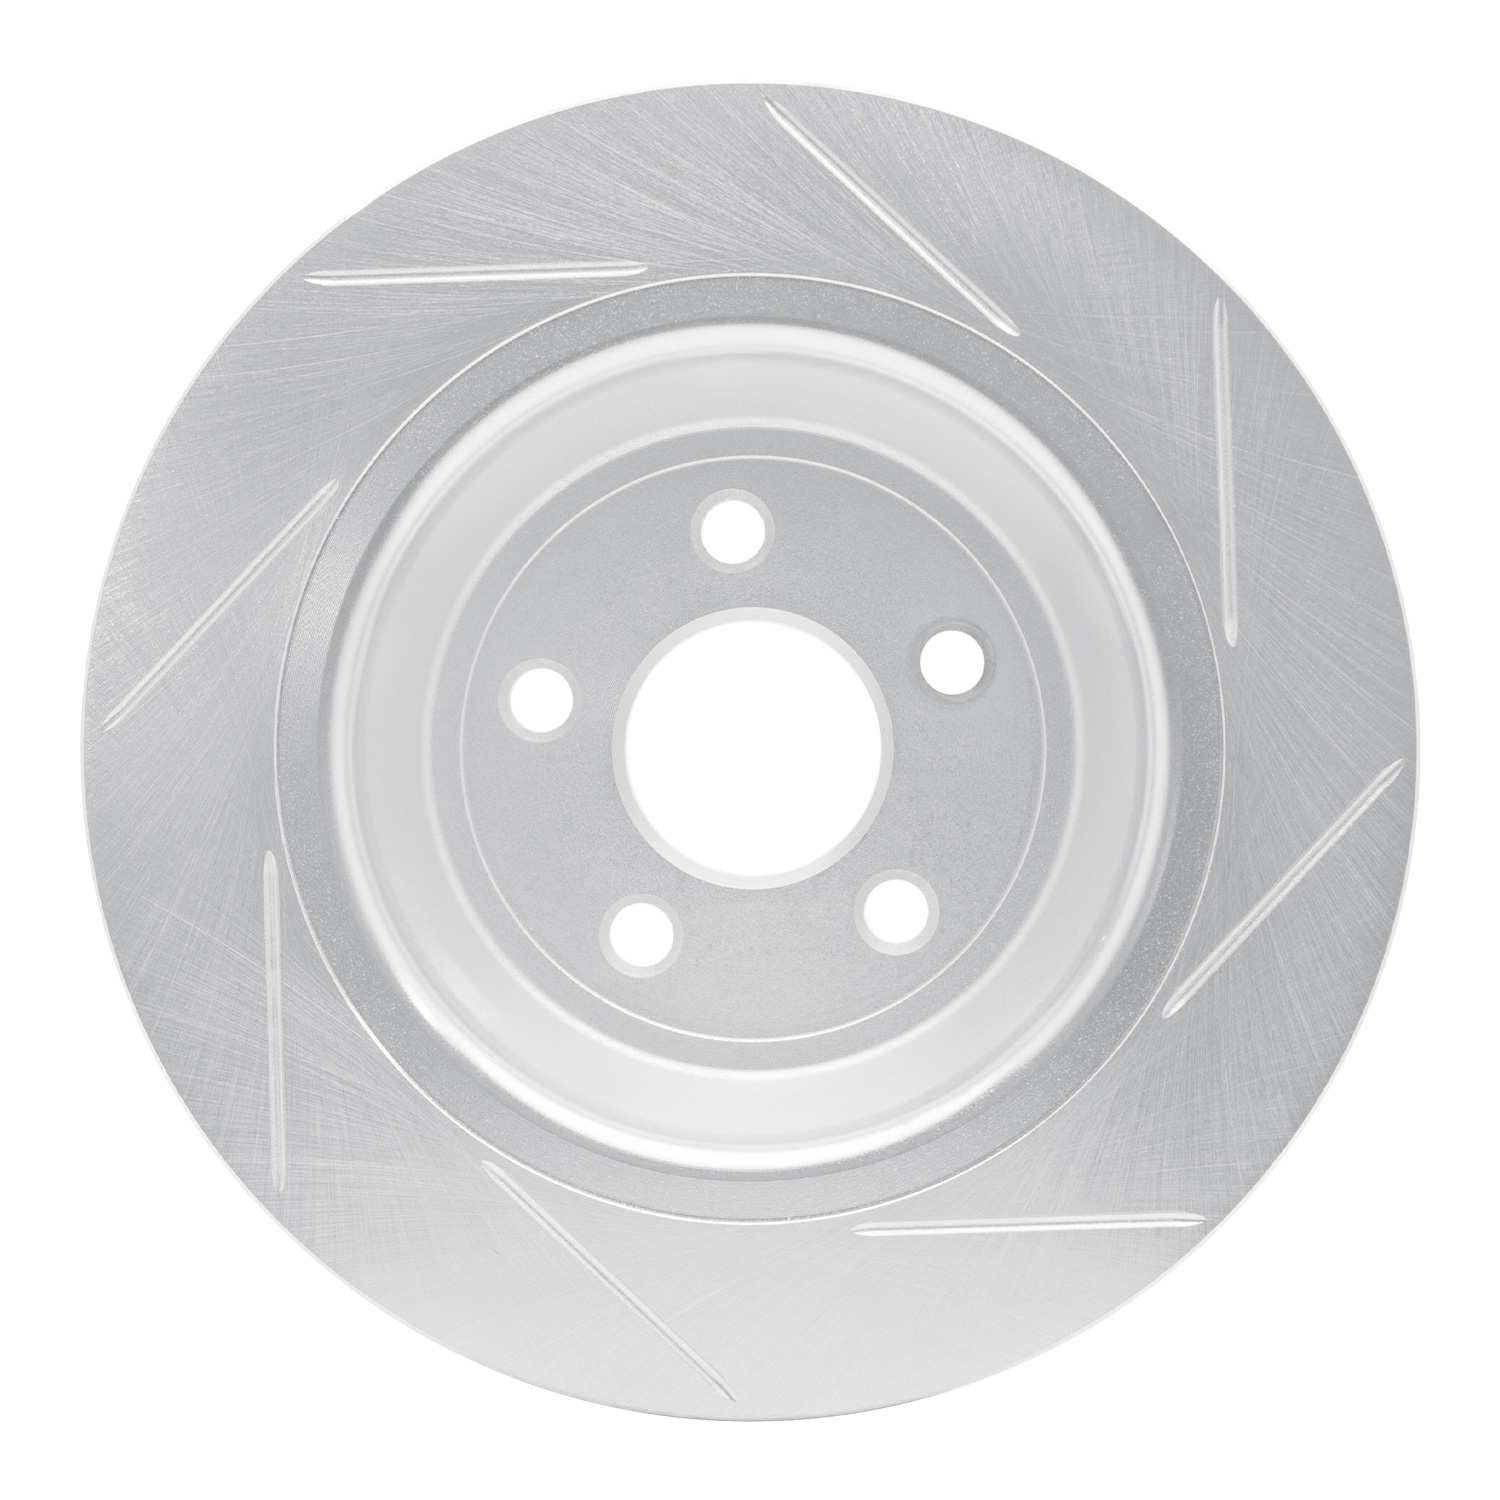 Slotted Brake Rotor [Silver], Fits Select Ford/Lincoln/Mercury/Mazda